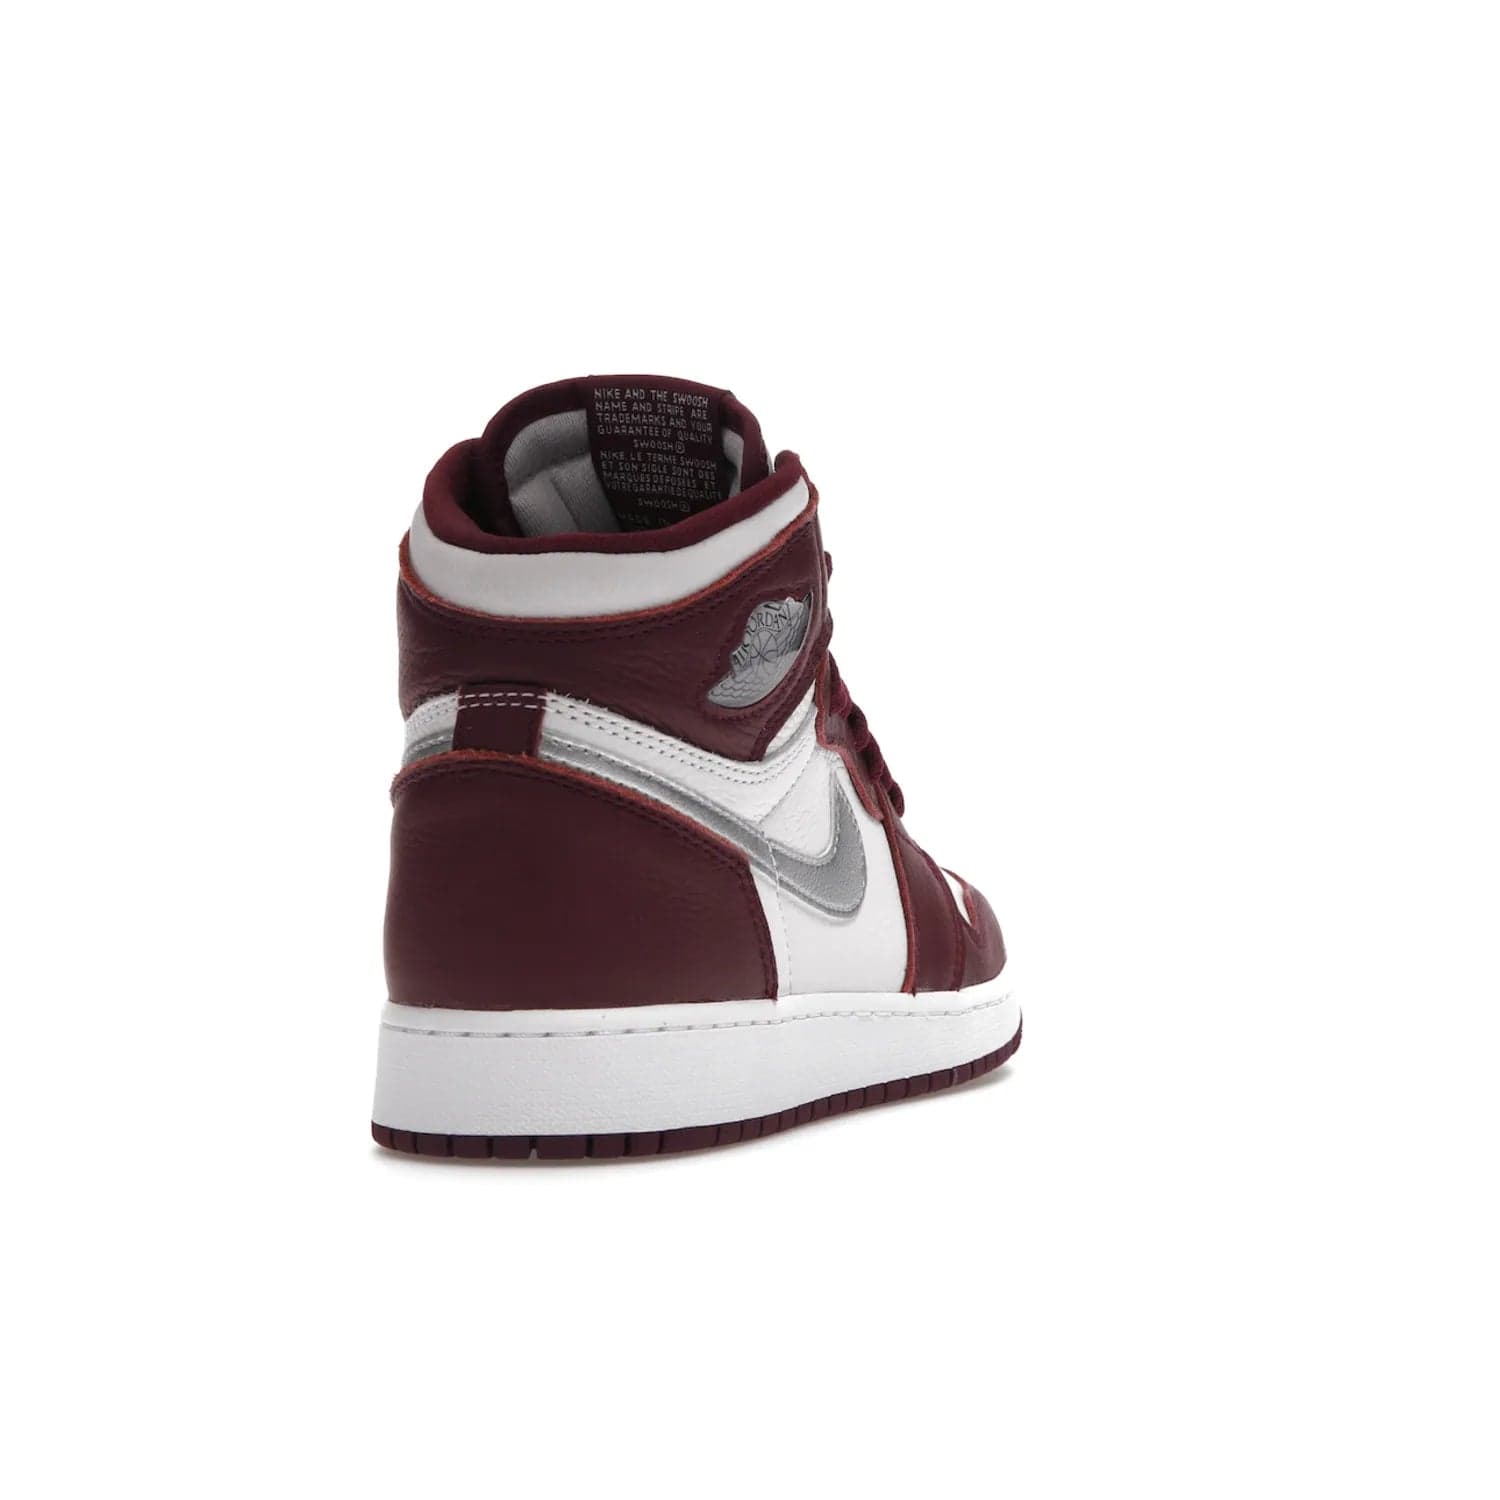 Jordan 1 Retro High OG Bordeaux (GS) - Image 30 - Only at www.BallersClubKickz.com - #
Introducing the Air Jordan 1 Retro High OG Bordeaux GS – a signature colorway part of the Jordan Brand Fall 2021 lineup. White leather upper & Bordeaux overlays, metallic silver swoosh, jeweled Air Jordan Wings logo & more. Step up your style game with this sleek fall season silhouette.